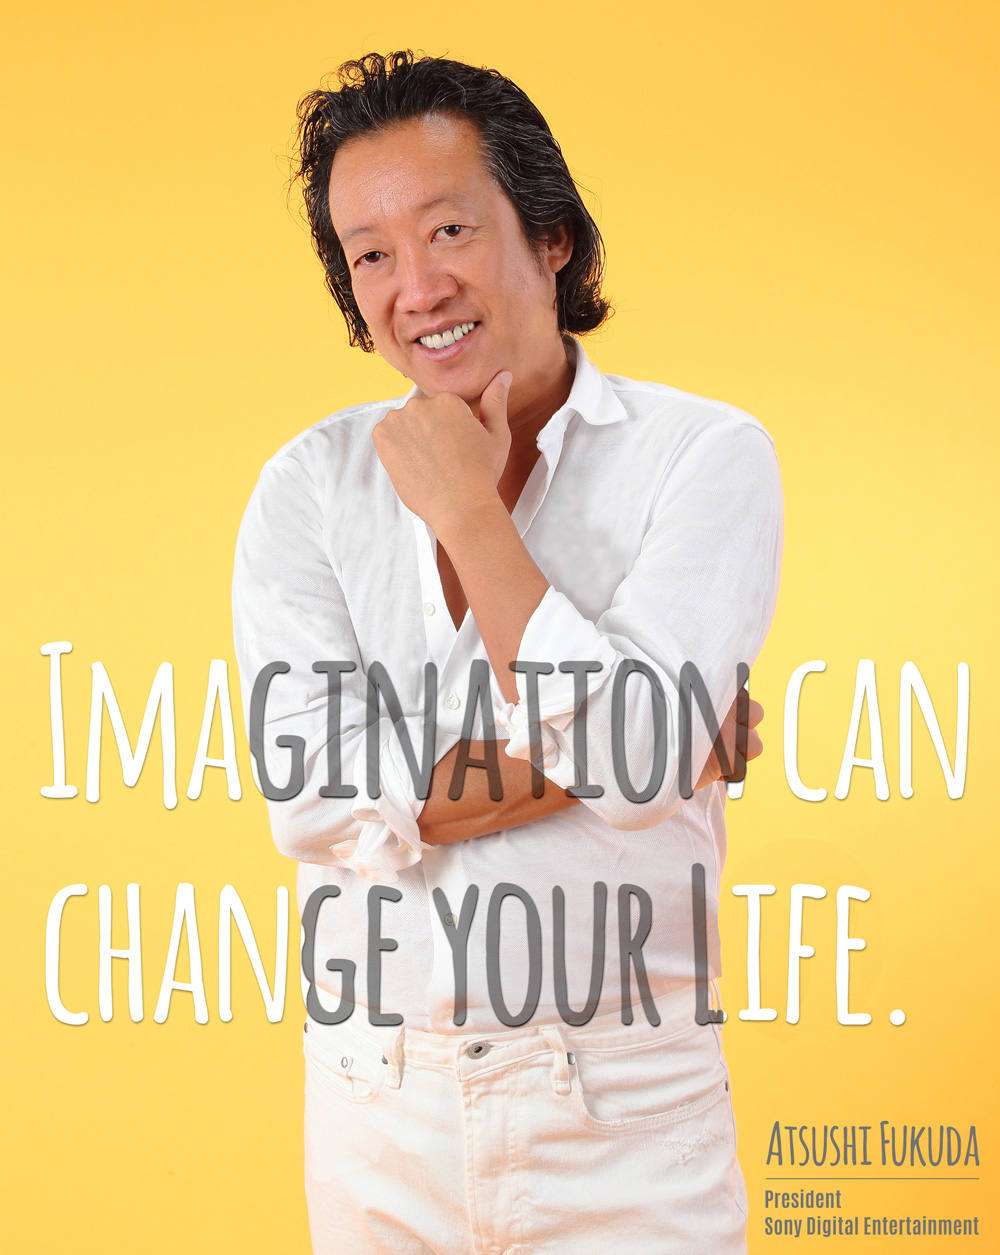 Imagination Can Change Your Life.